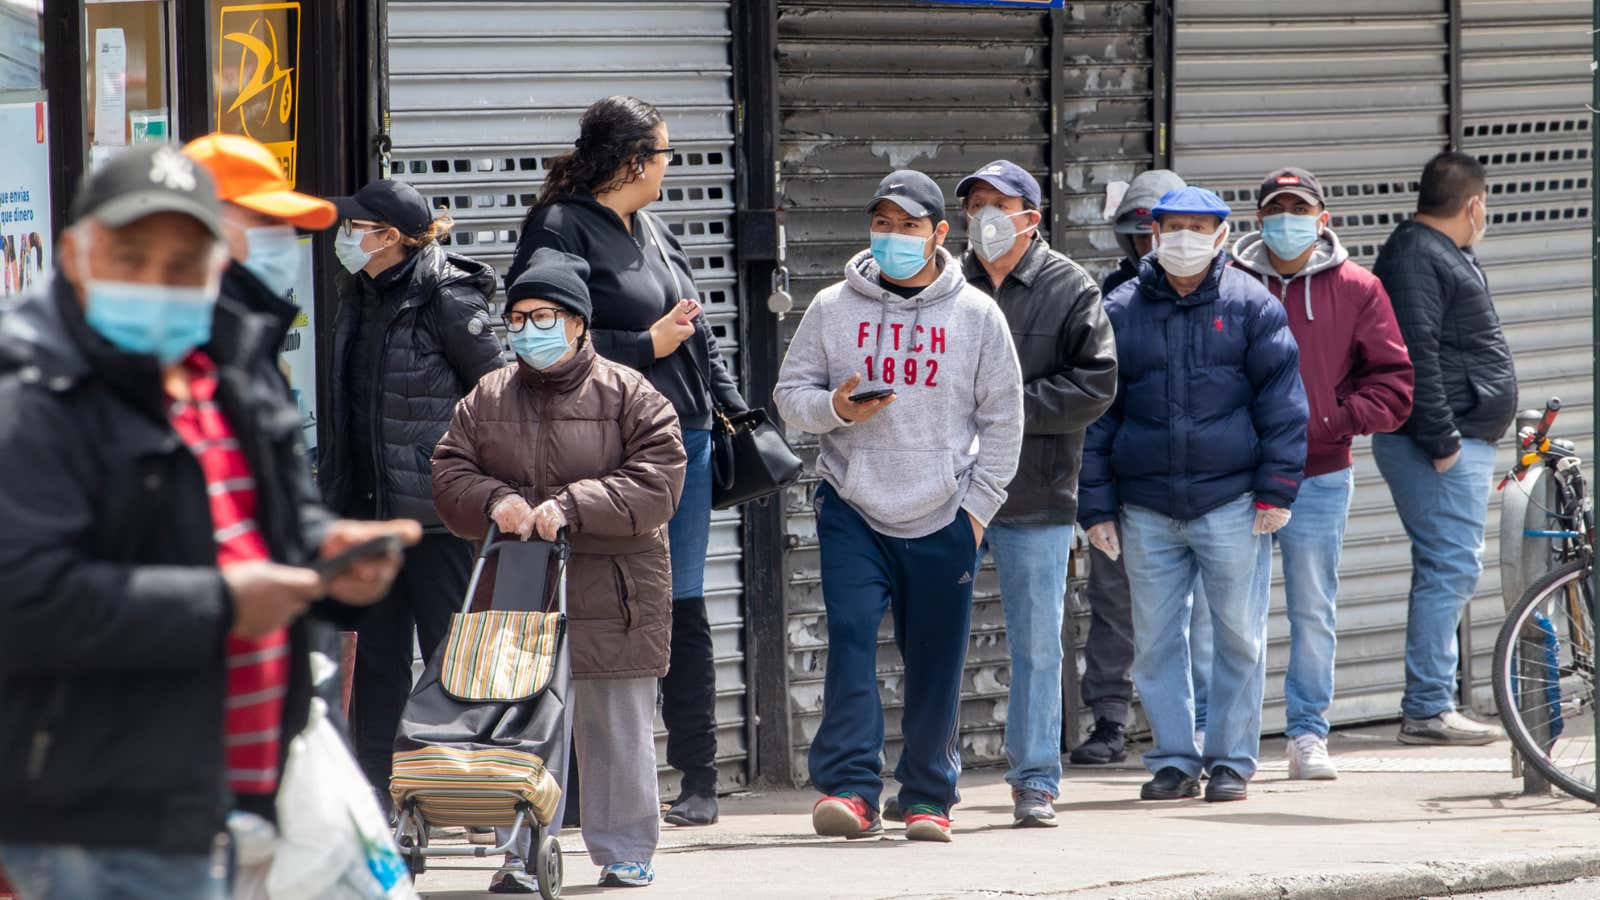 A line of people wearing face masks in New York City.